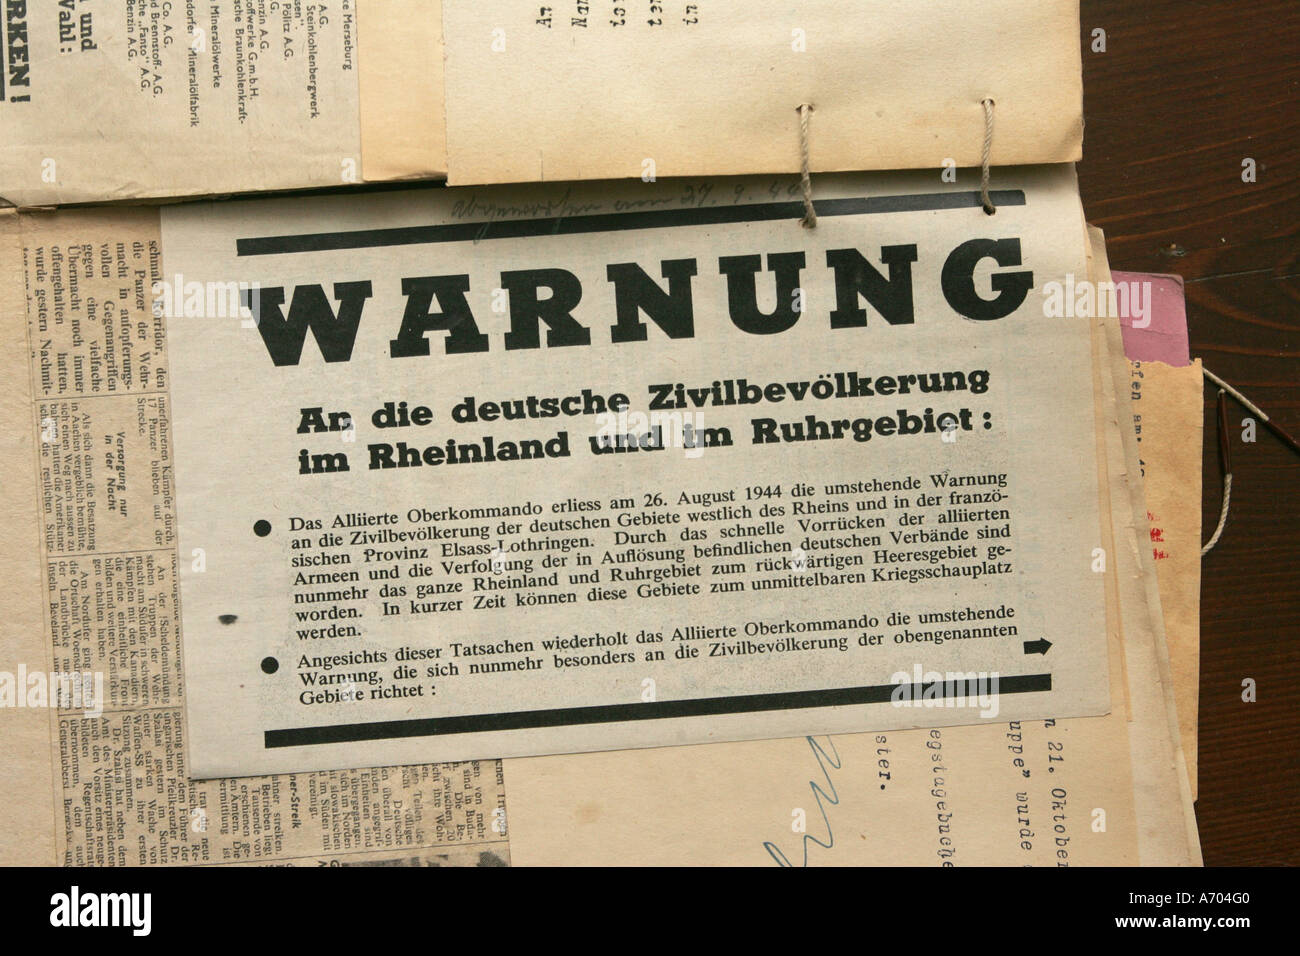 Mannheim, DEU, 17.03.2005, handbill of the Allies dropped off at the end of the 2. World War Stock Photo